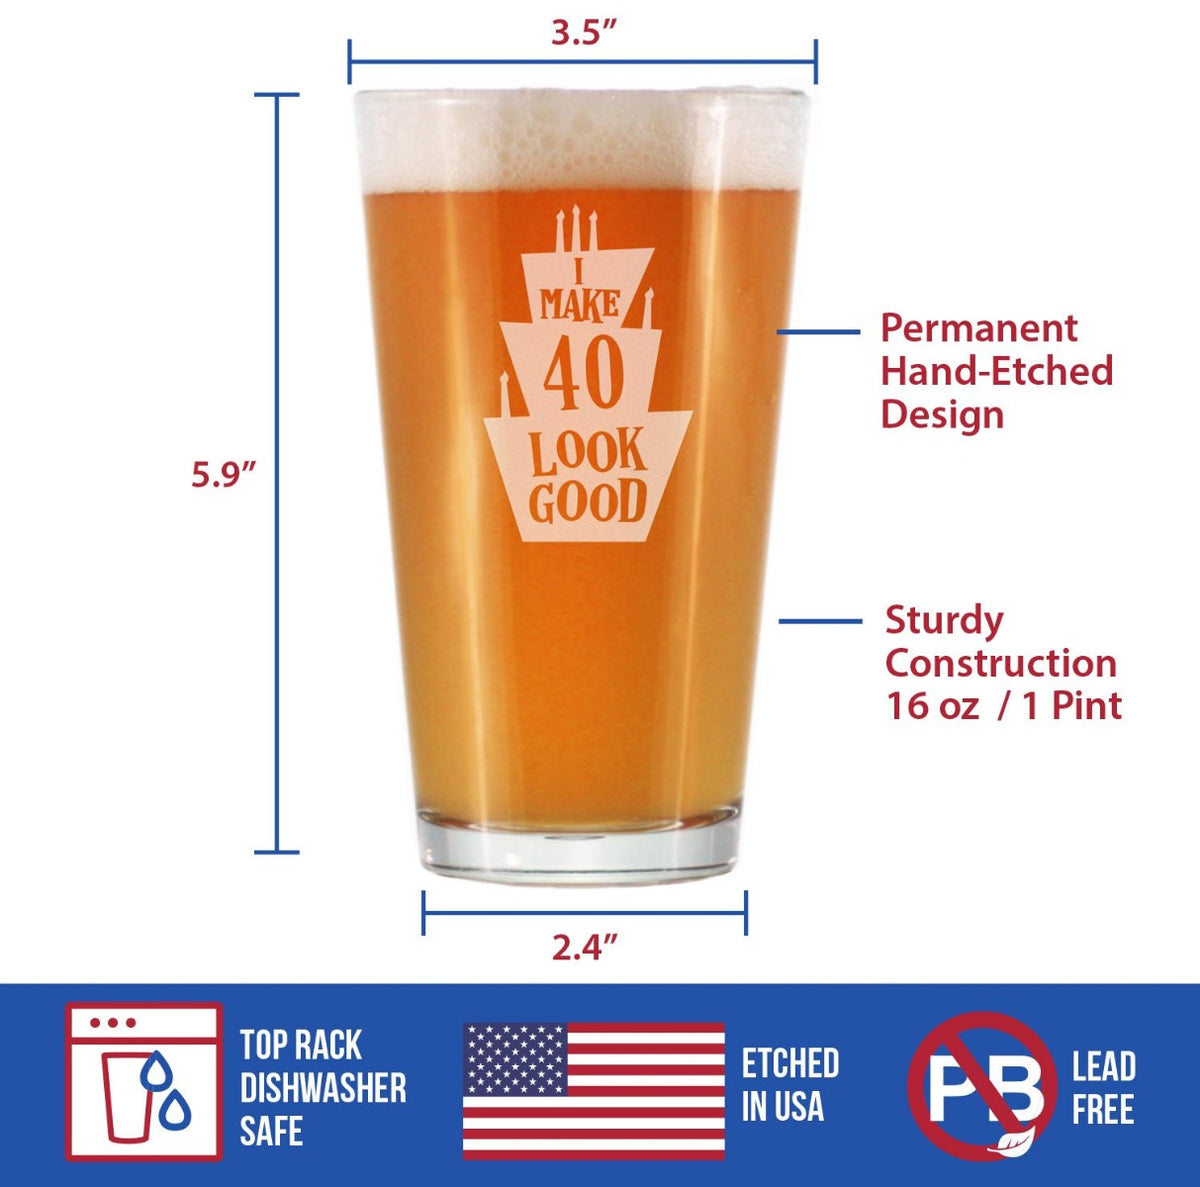 Make 40 Look Good - Funny 16 oz Pint Glass for Beer - 40th Birthday Gifts for Men or Women Turning 40 - Bday Party Decor